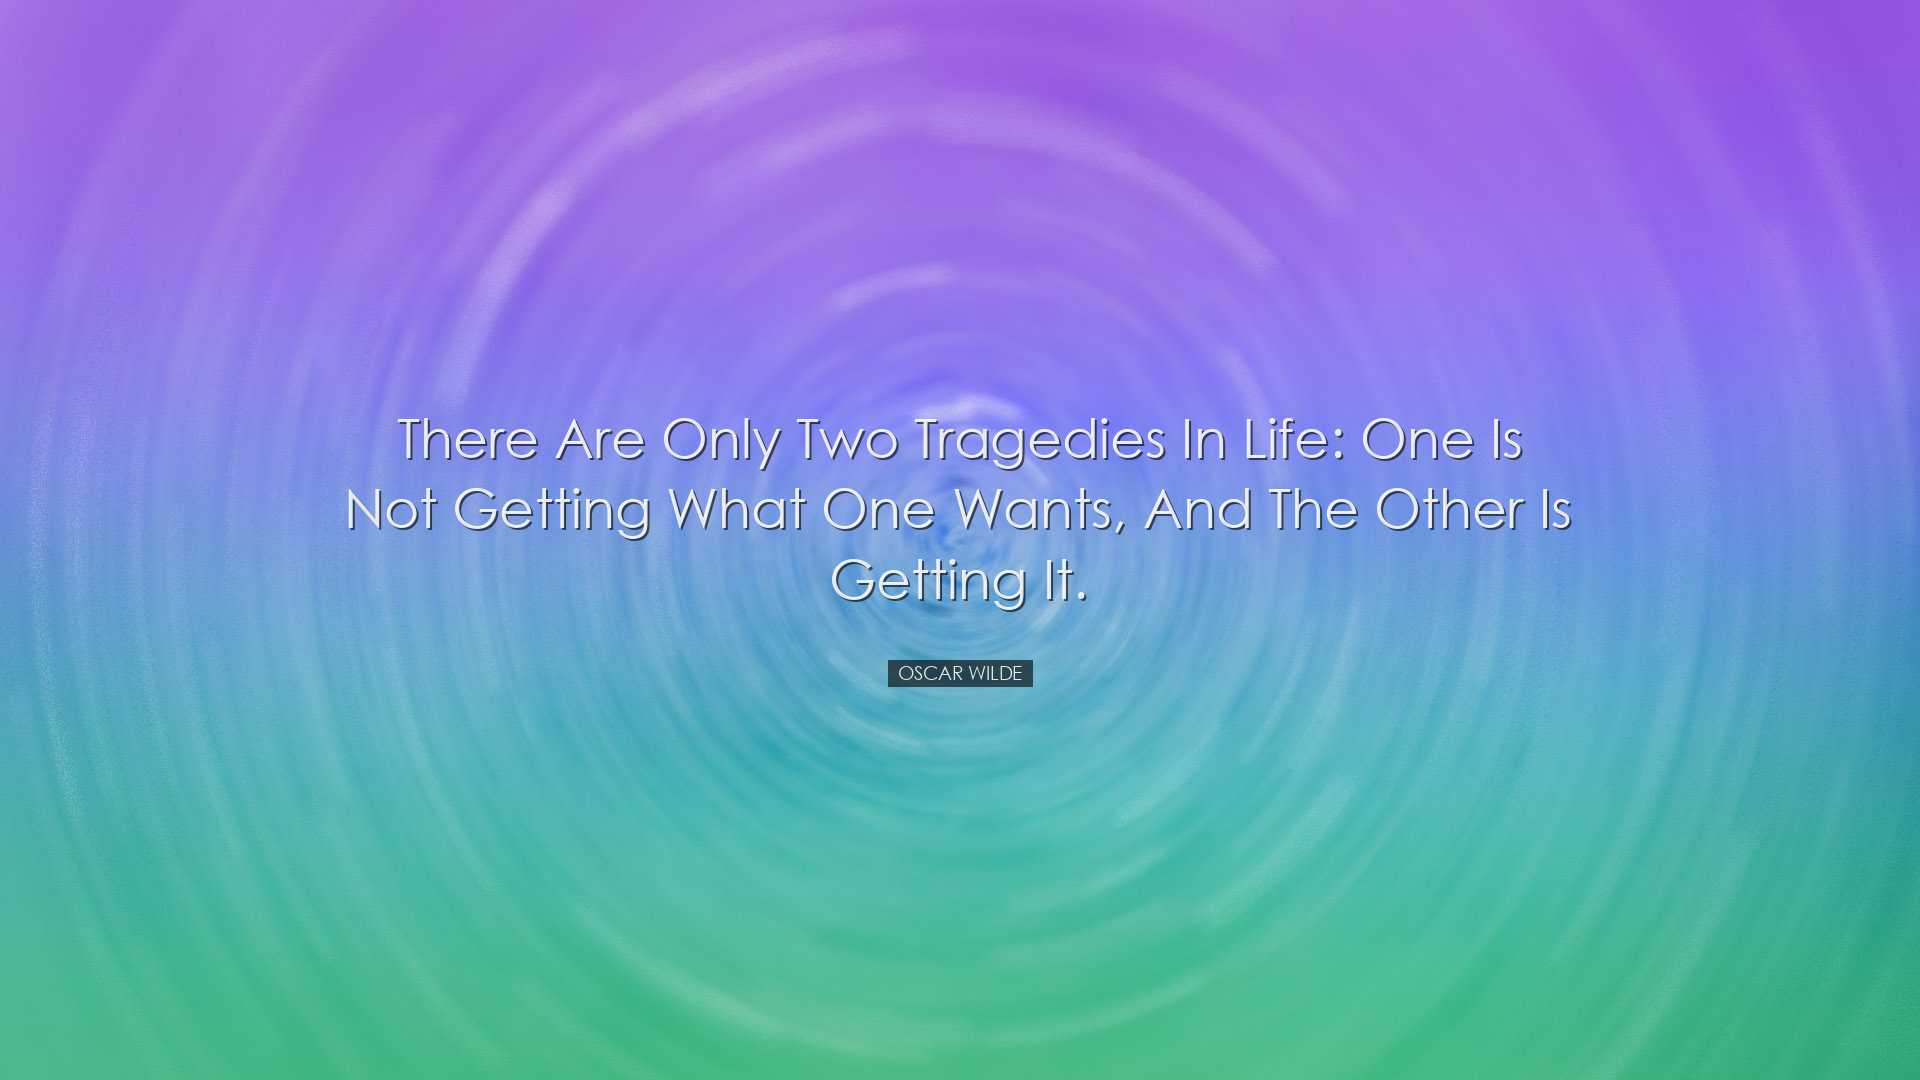 There are only two tragedies in life: one is not getting what one